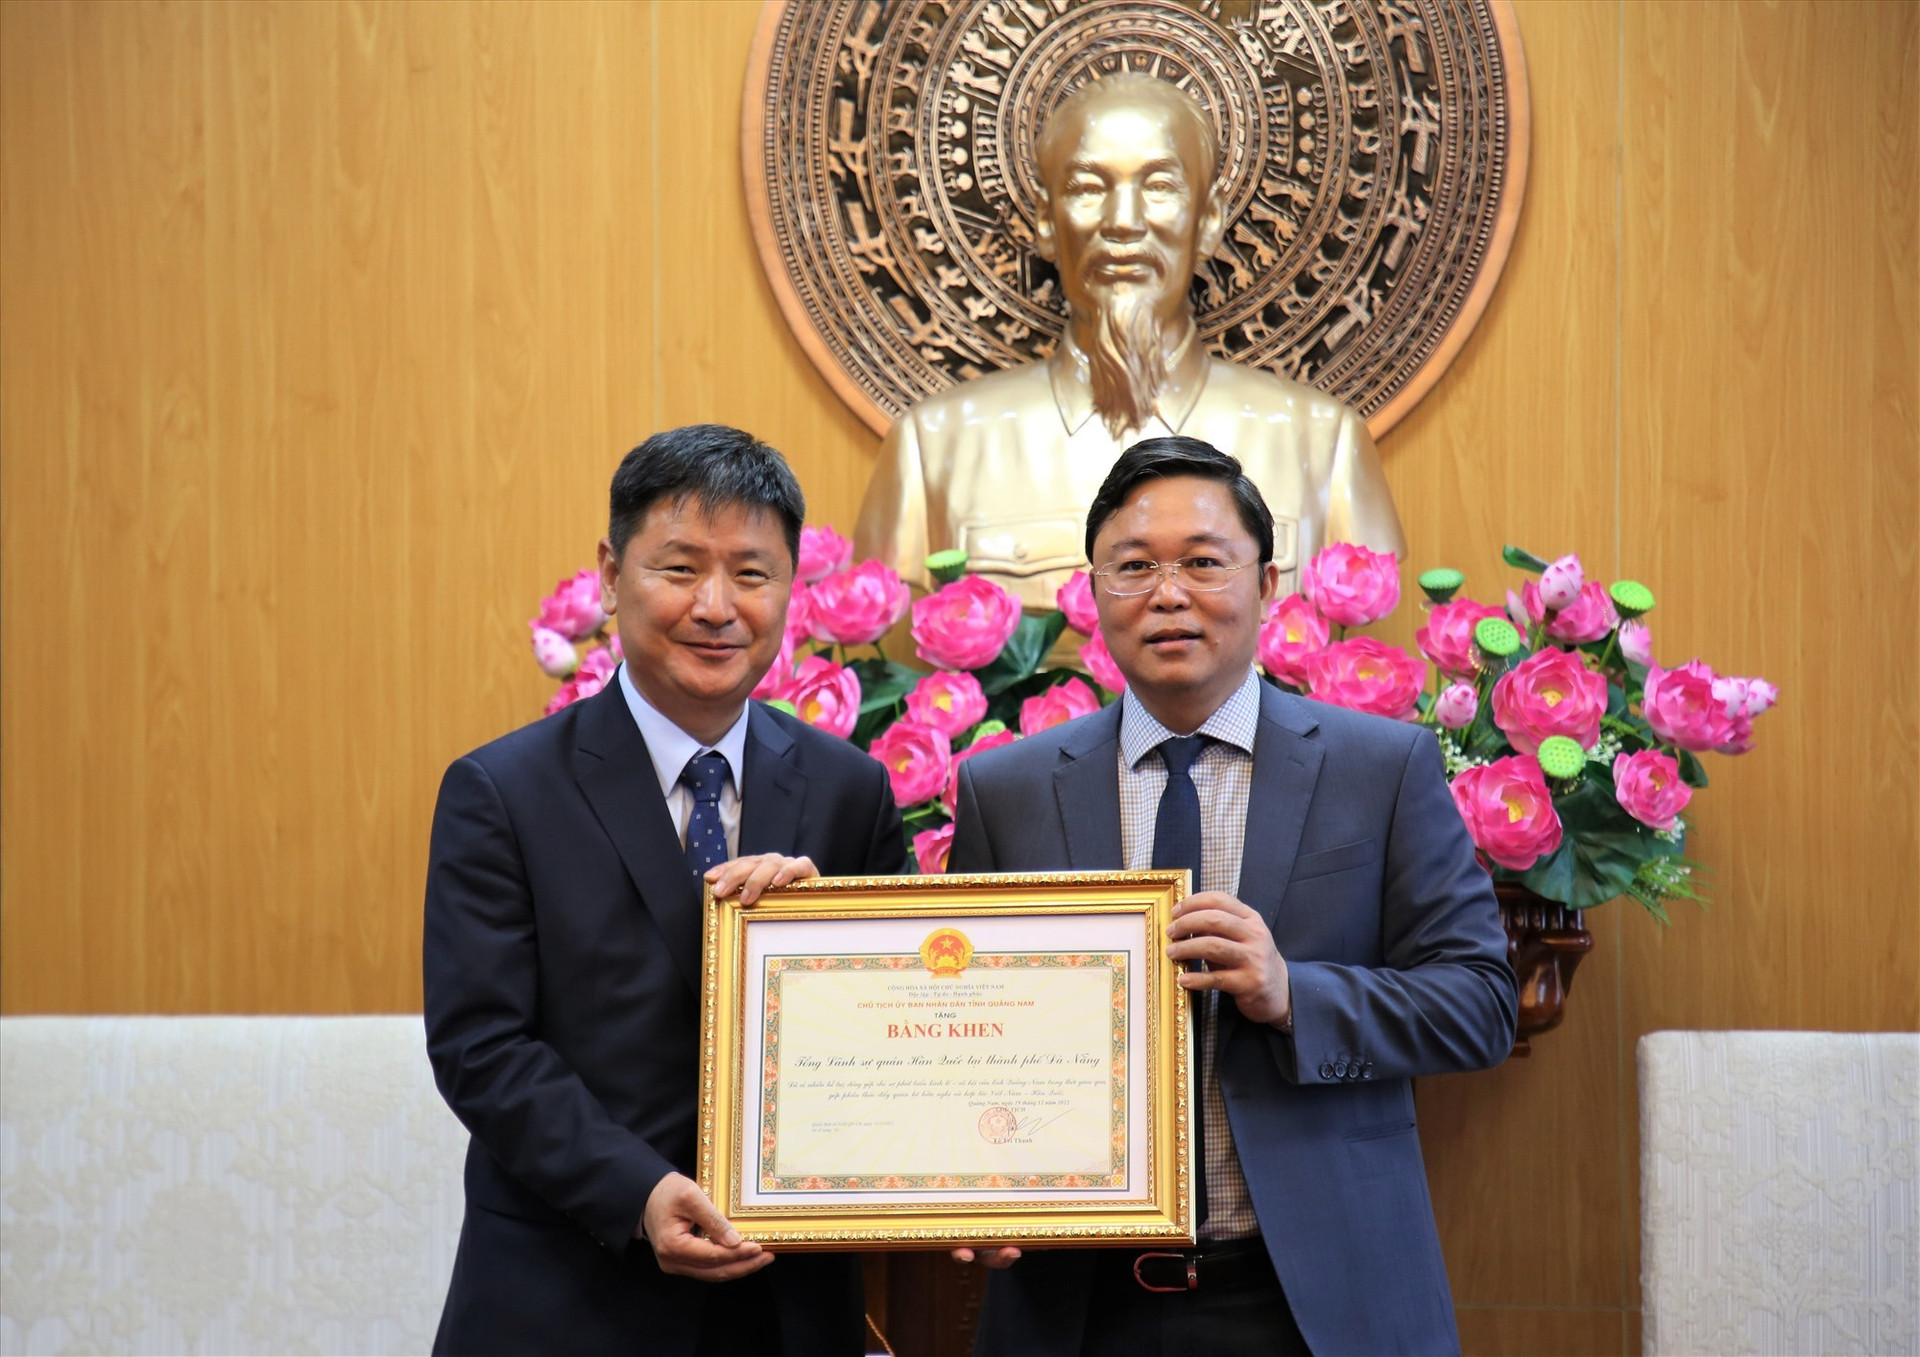 Quang Nam Chairman Le Tri Thanh (right) and Kang Boo Sung